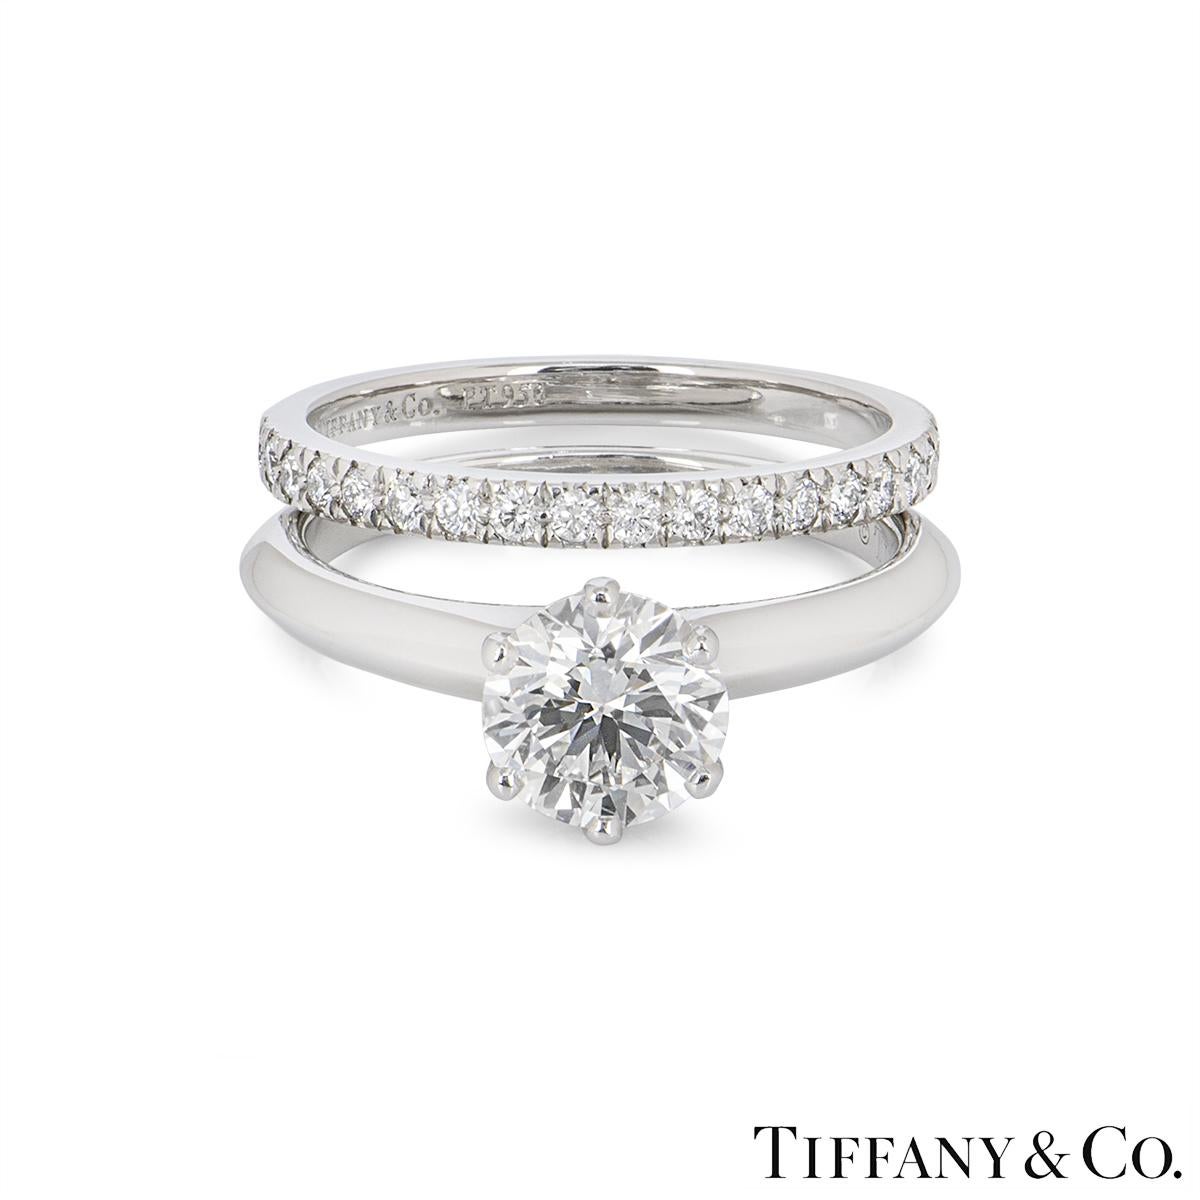 Brilliant Cut Tiffany & Co. Platinum Diamond Engagement and Eternity Ring 1.35ct GIA Certified